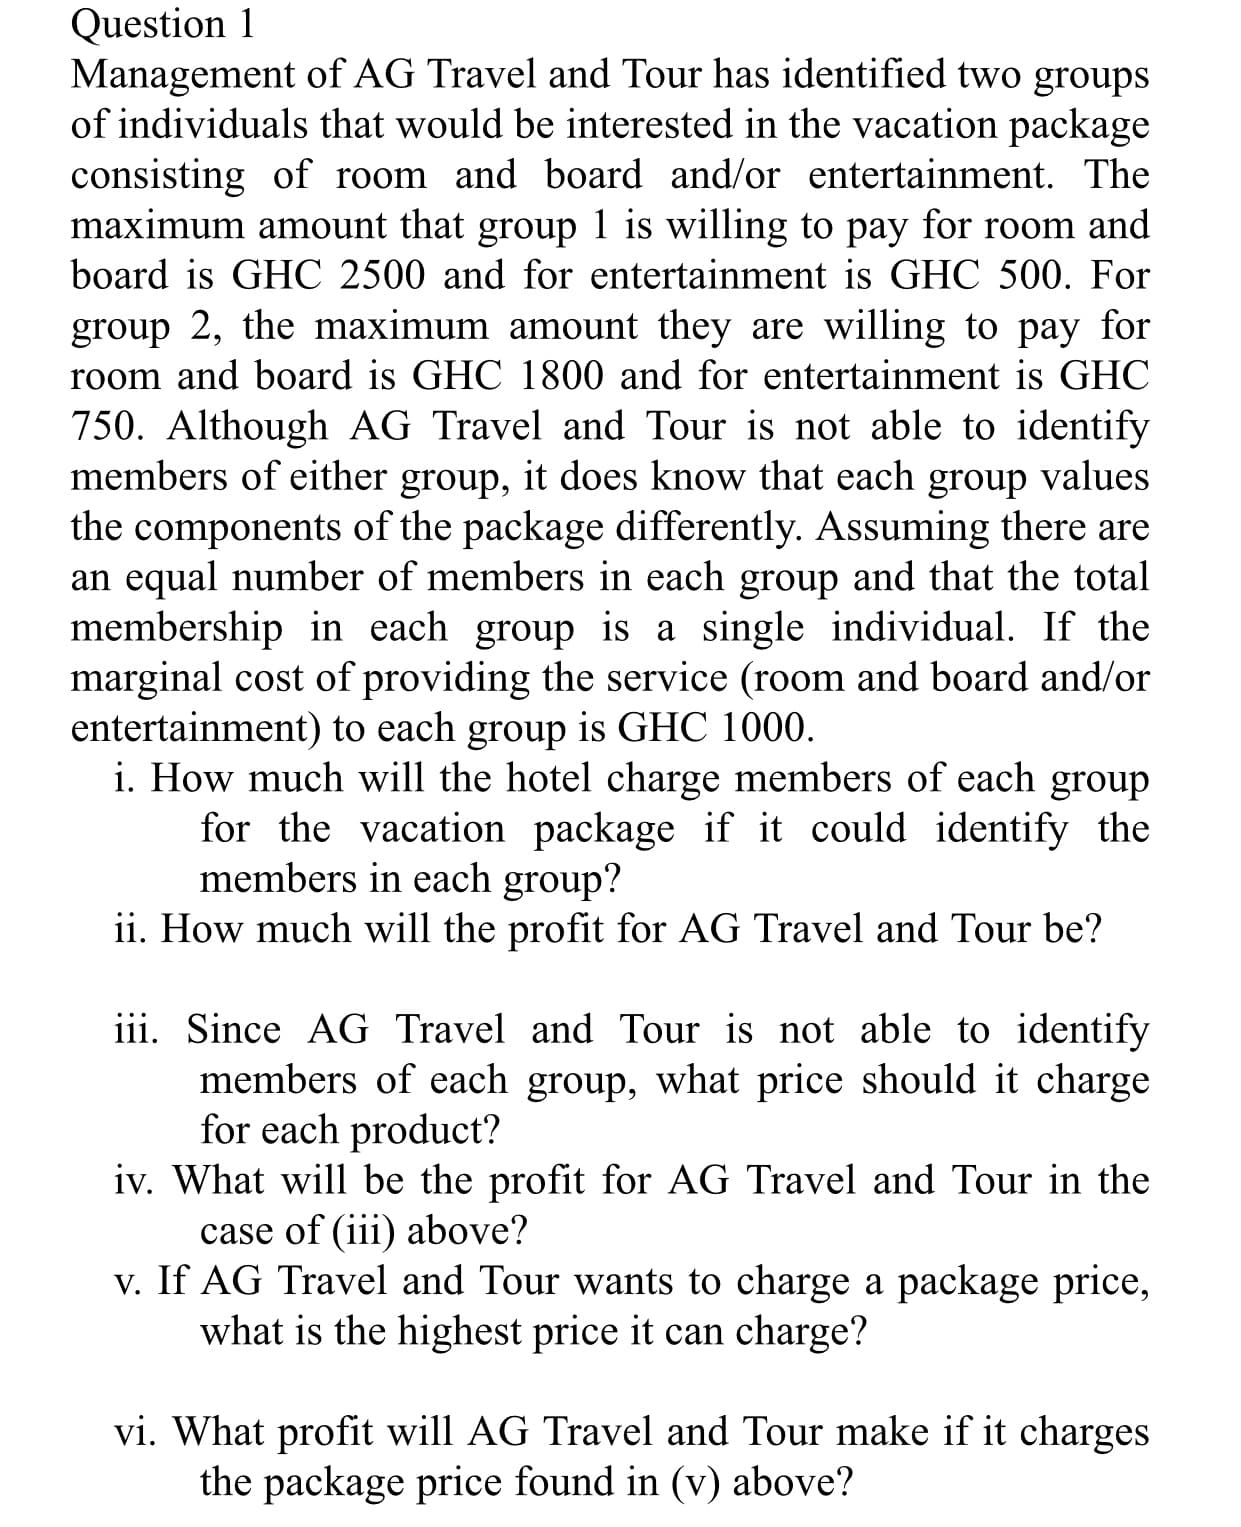 iv. What will be the profit for AG Travel and Tour in the
case of (iii) above?
v. If AG Travel and Tour wants to charge a package price,
what is the highest price it can charge?
vi. What profit will AG Travel and Tour make if it charges
the package price found in (v) above?
